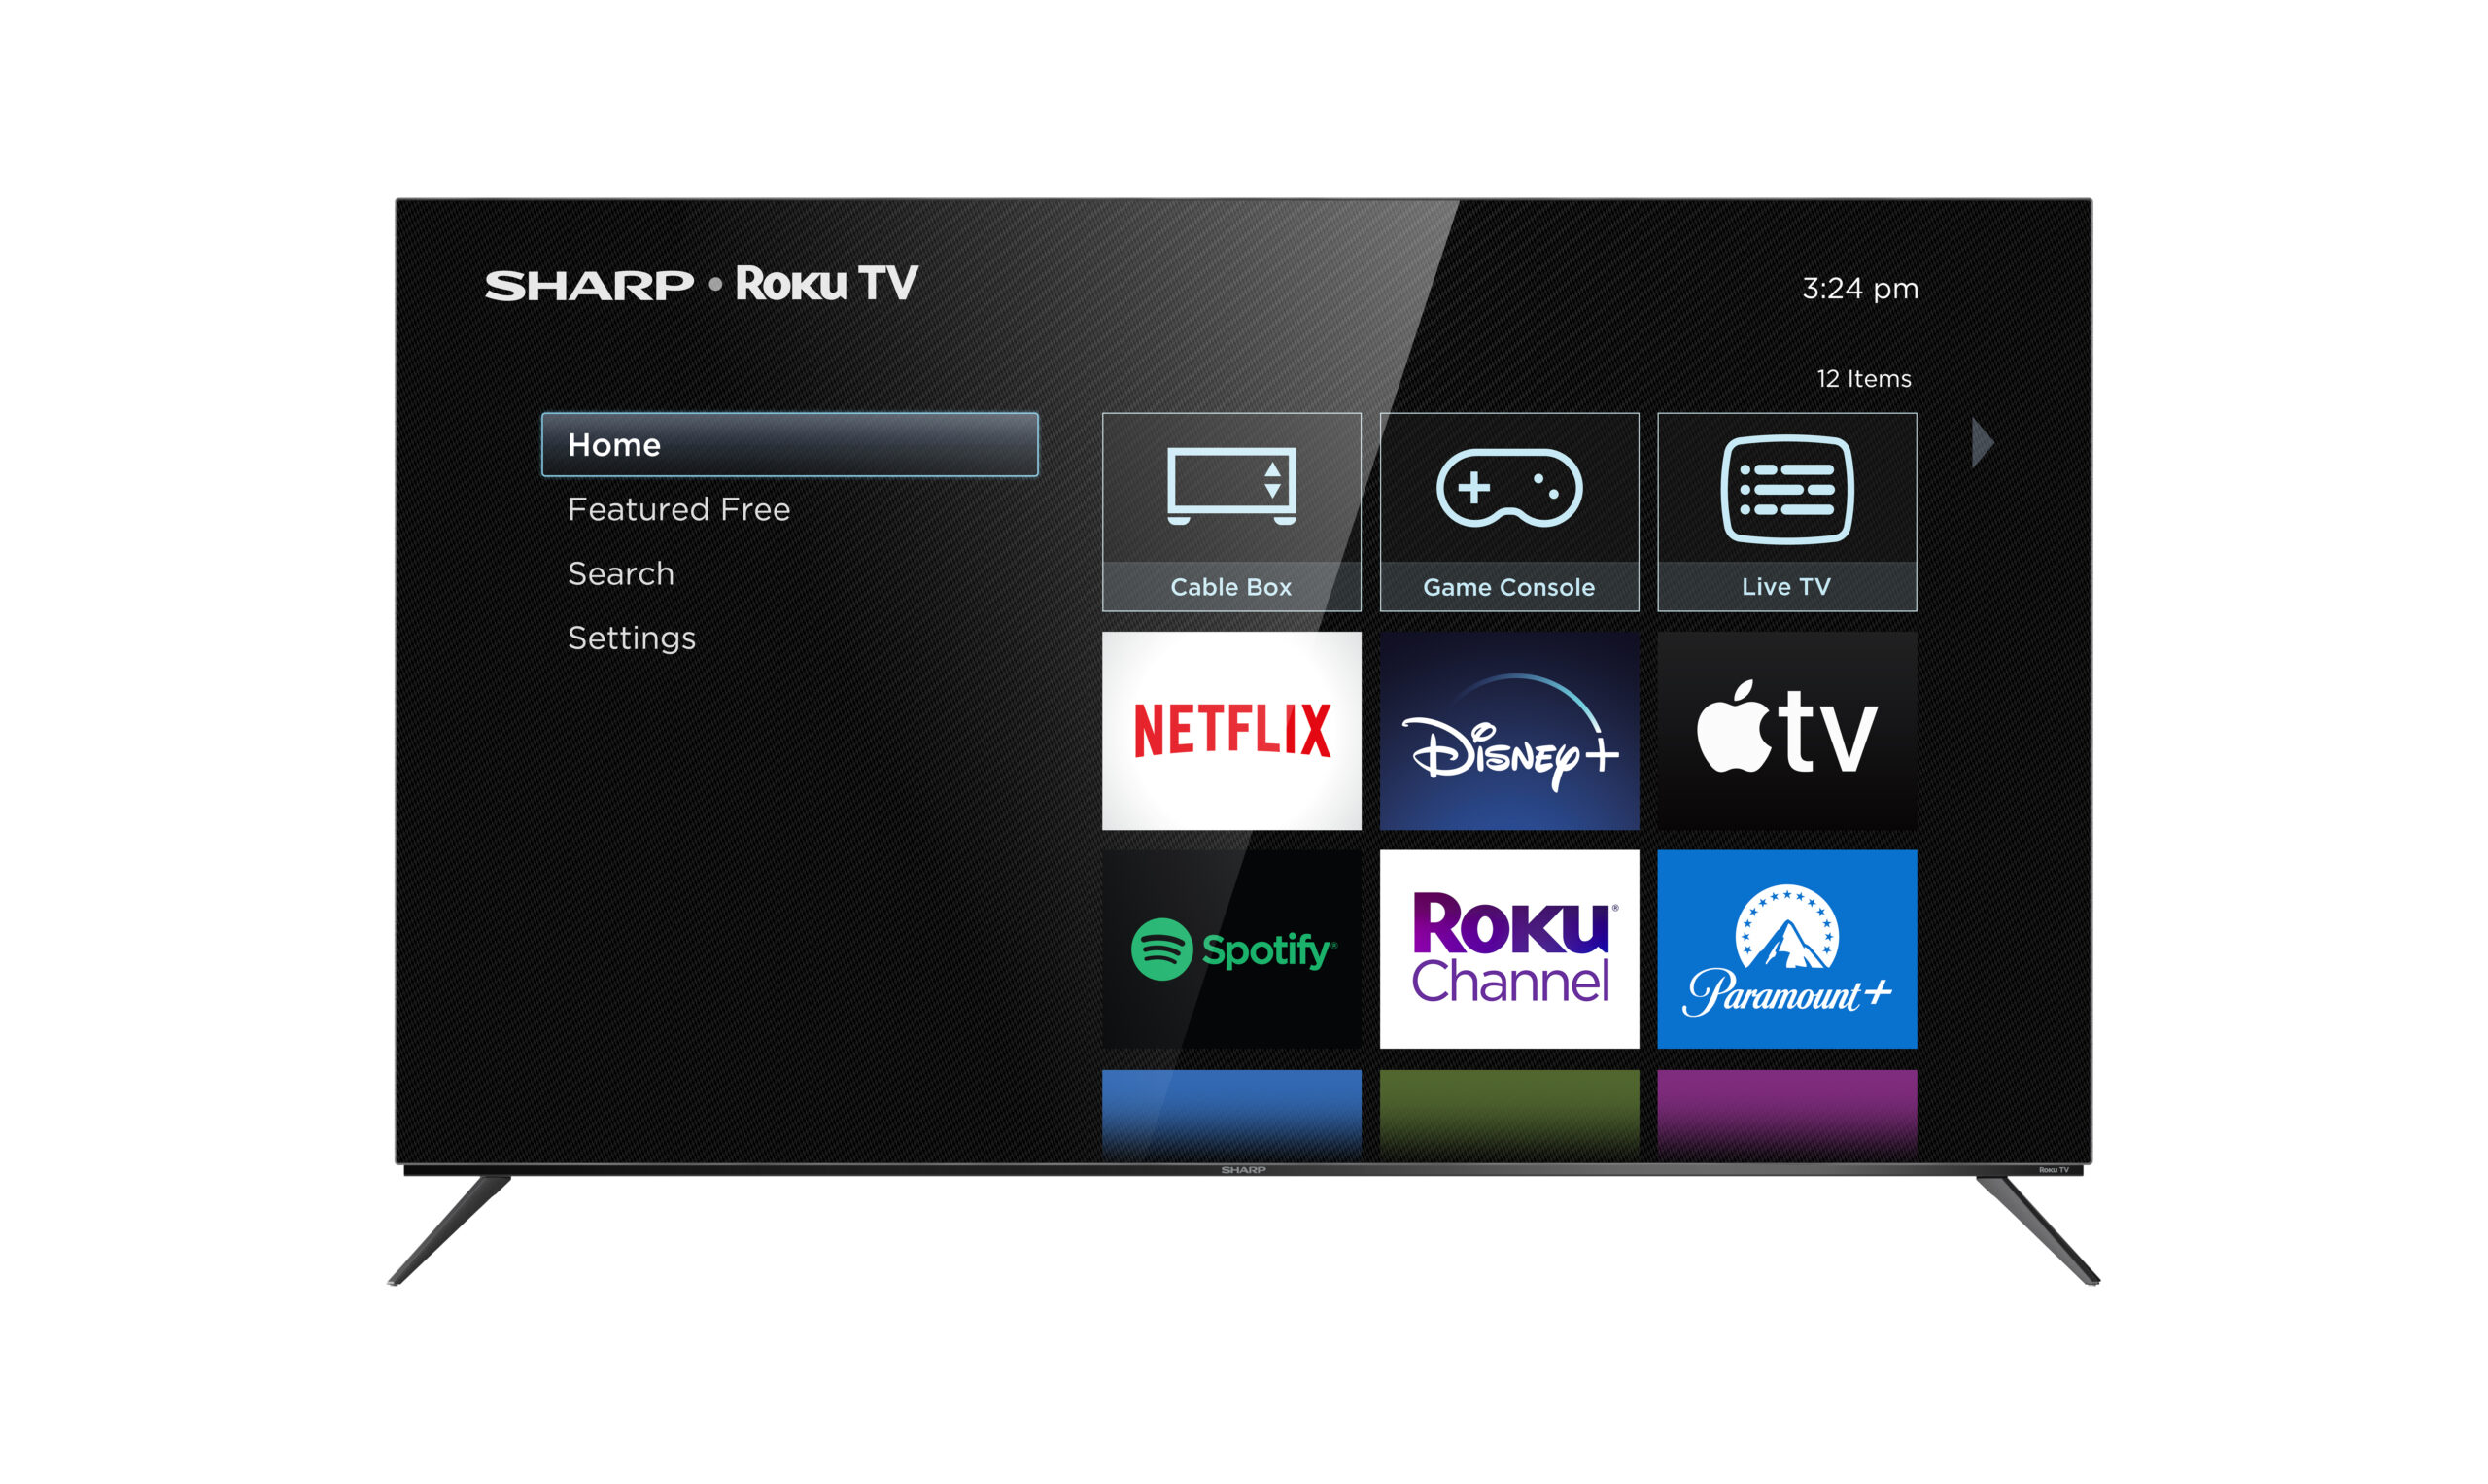 Roku powered TVs have easy to identify HDMI ports directly on the home screen instead of burying them in settings. 